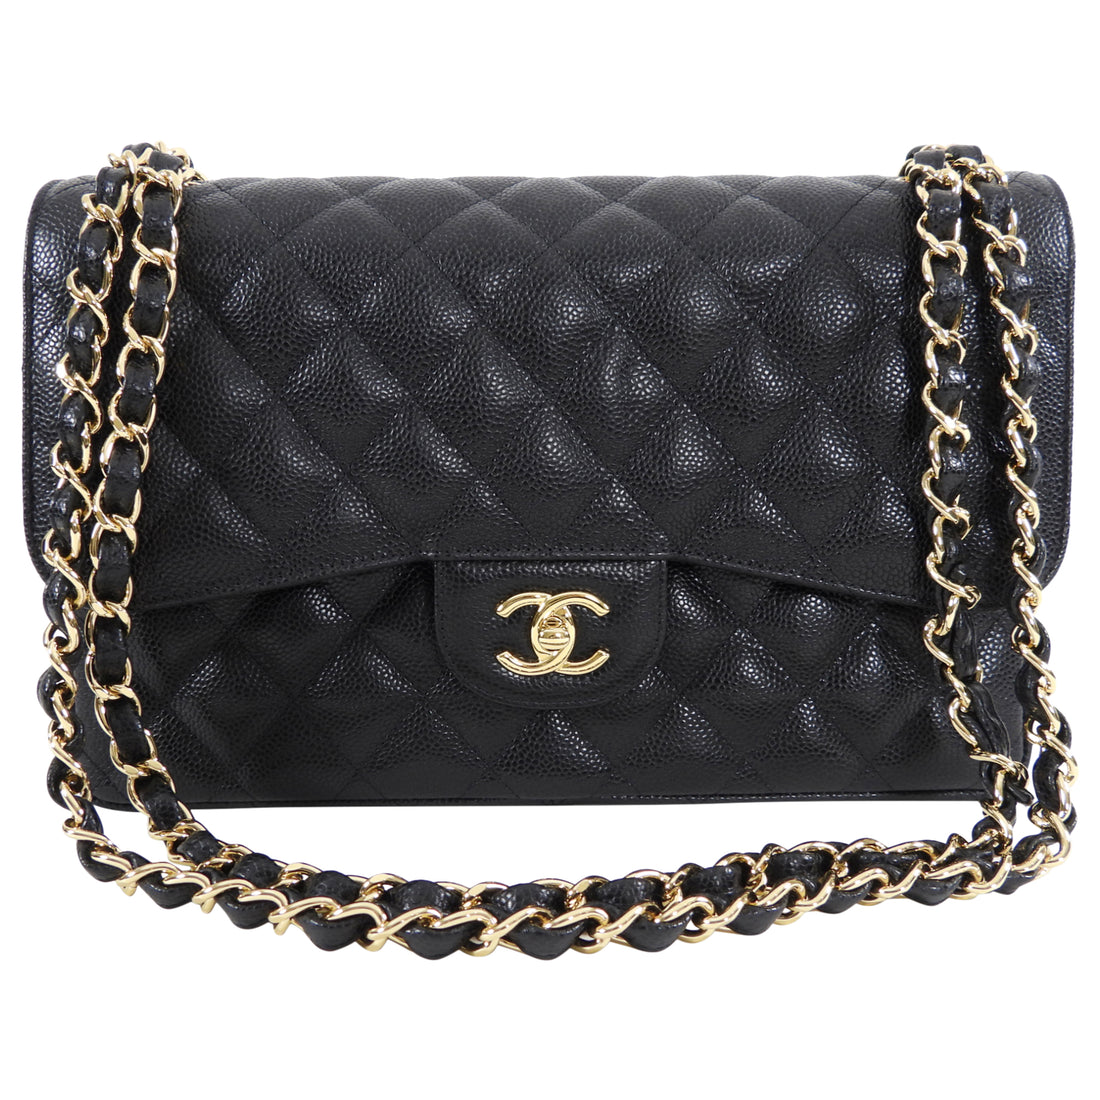 Bag of the Day 22: CHANEL Classic Flaps Jumbo Black Caviar Leather GHW  #bagoftheday 